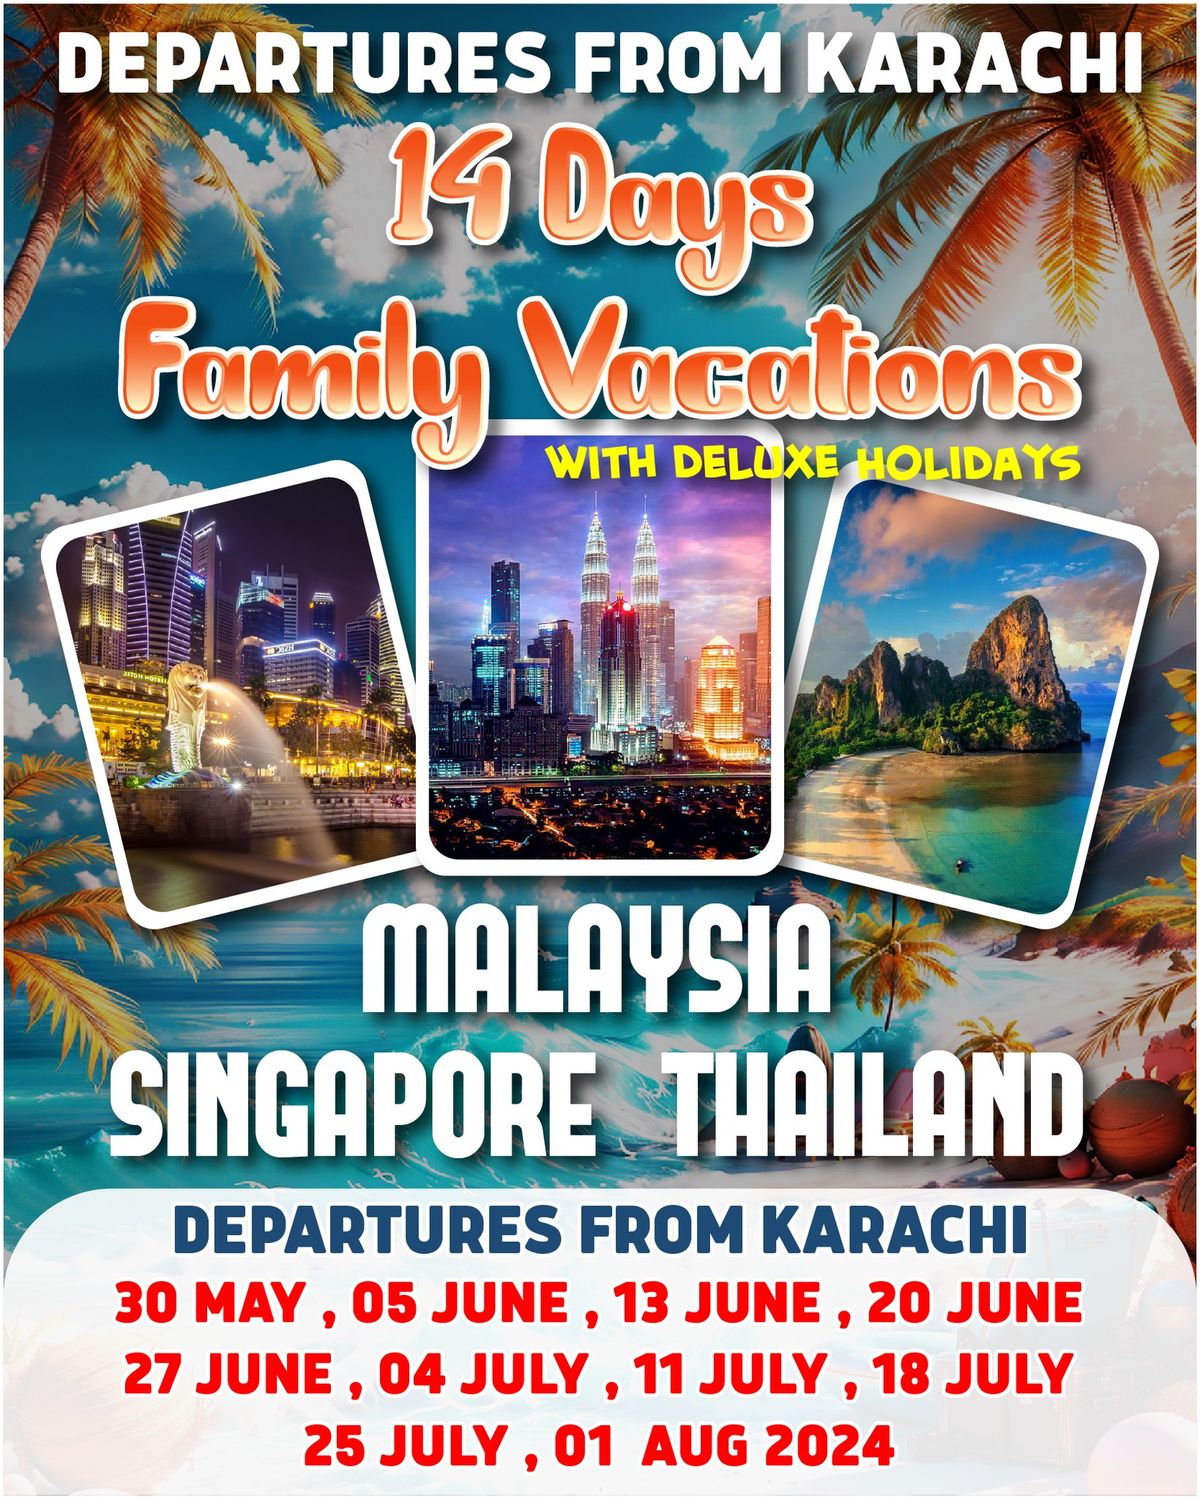 FAMILY VACATIONS - 14 DAYS WITH DELUXE HOLIDAYS